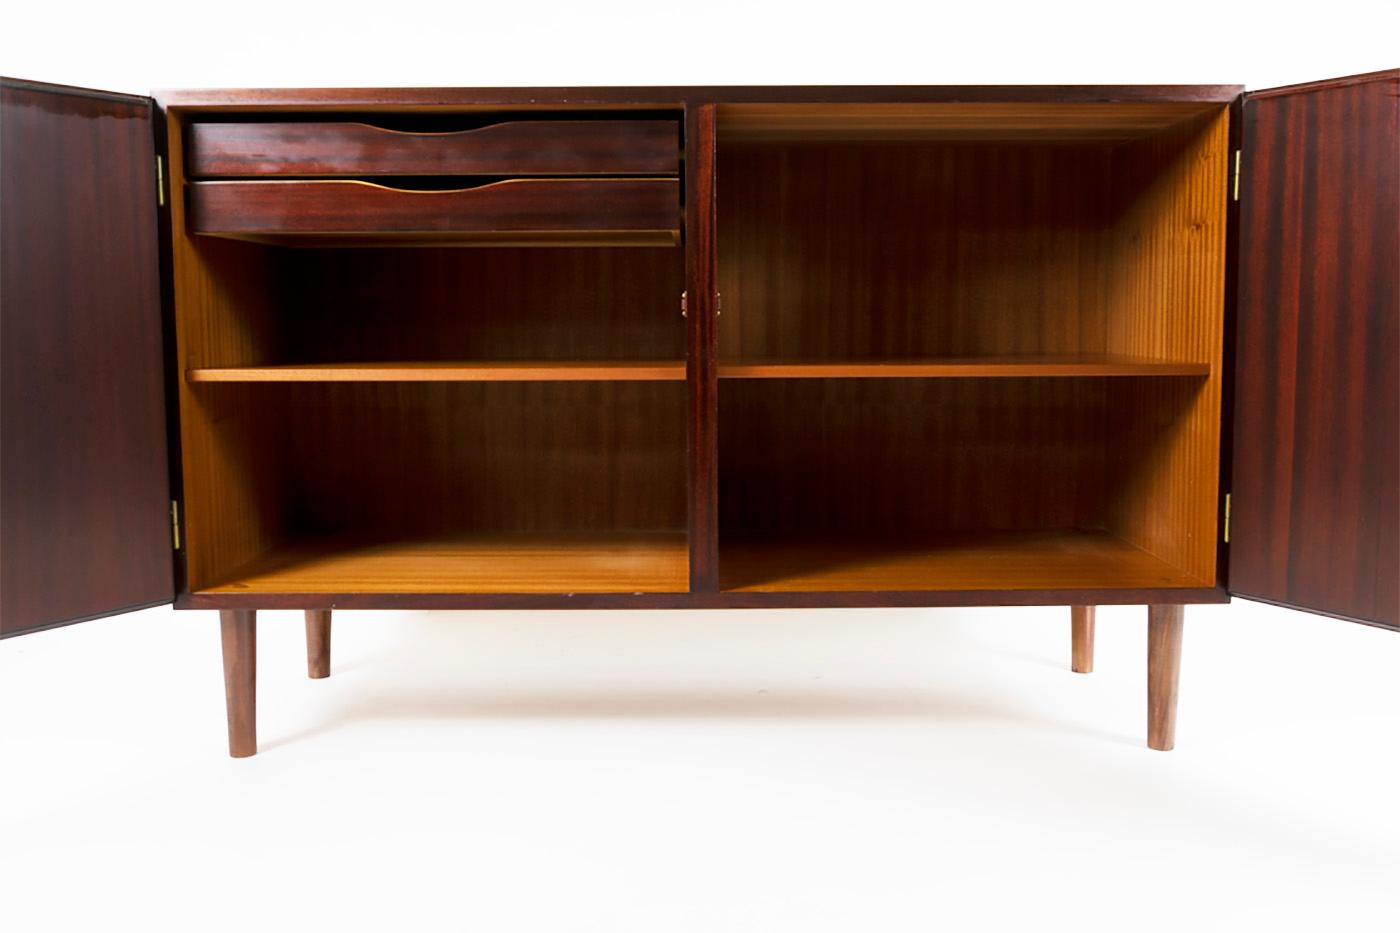 Rosewood cabinet from the 1960s-1970s, Danish design. Manufactured by Omann Jun. Furniture surface finished with rosewood veneer. Inside there are two drawers covered with green fabric for cutlery and adjustable shelves. Doors with 